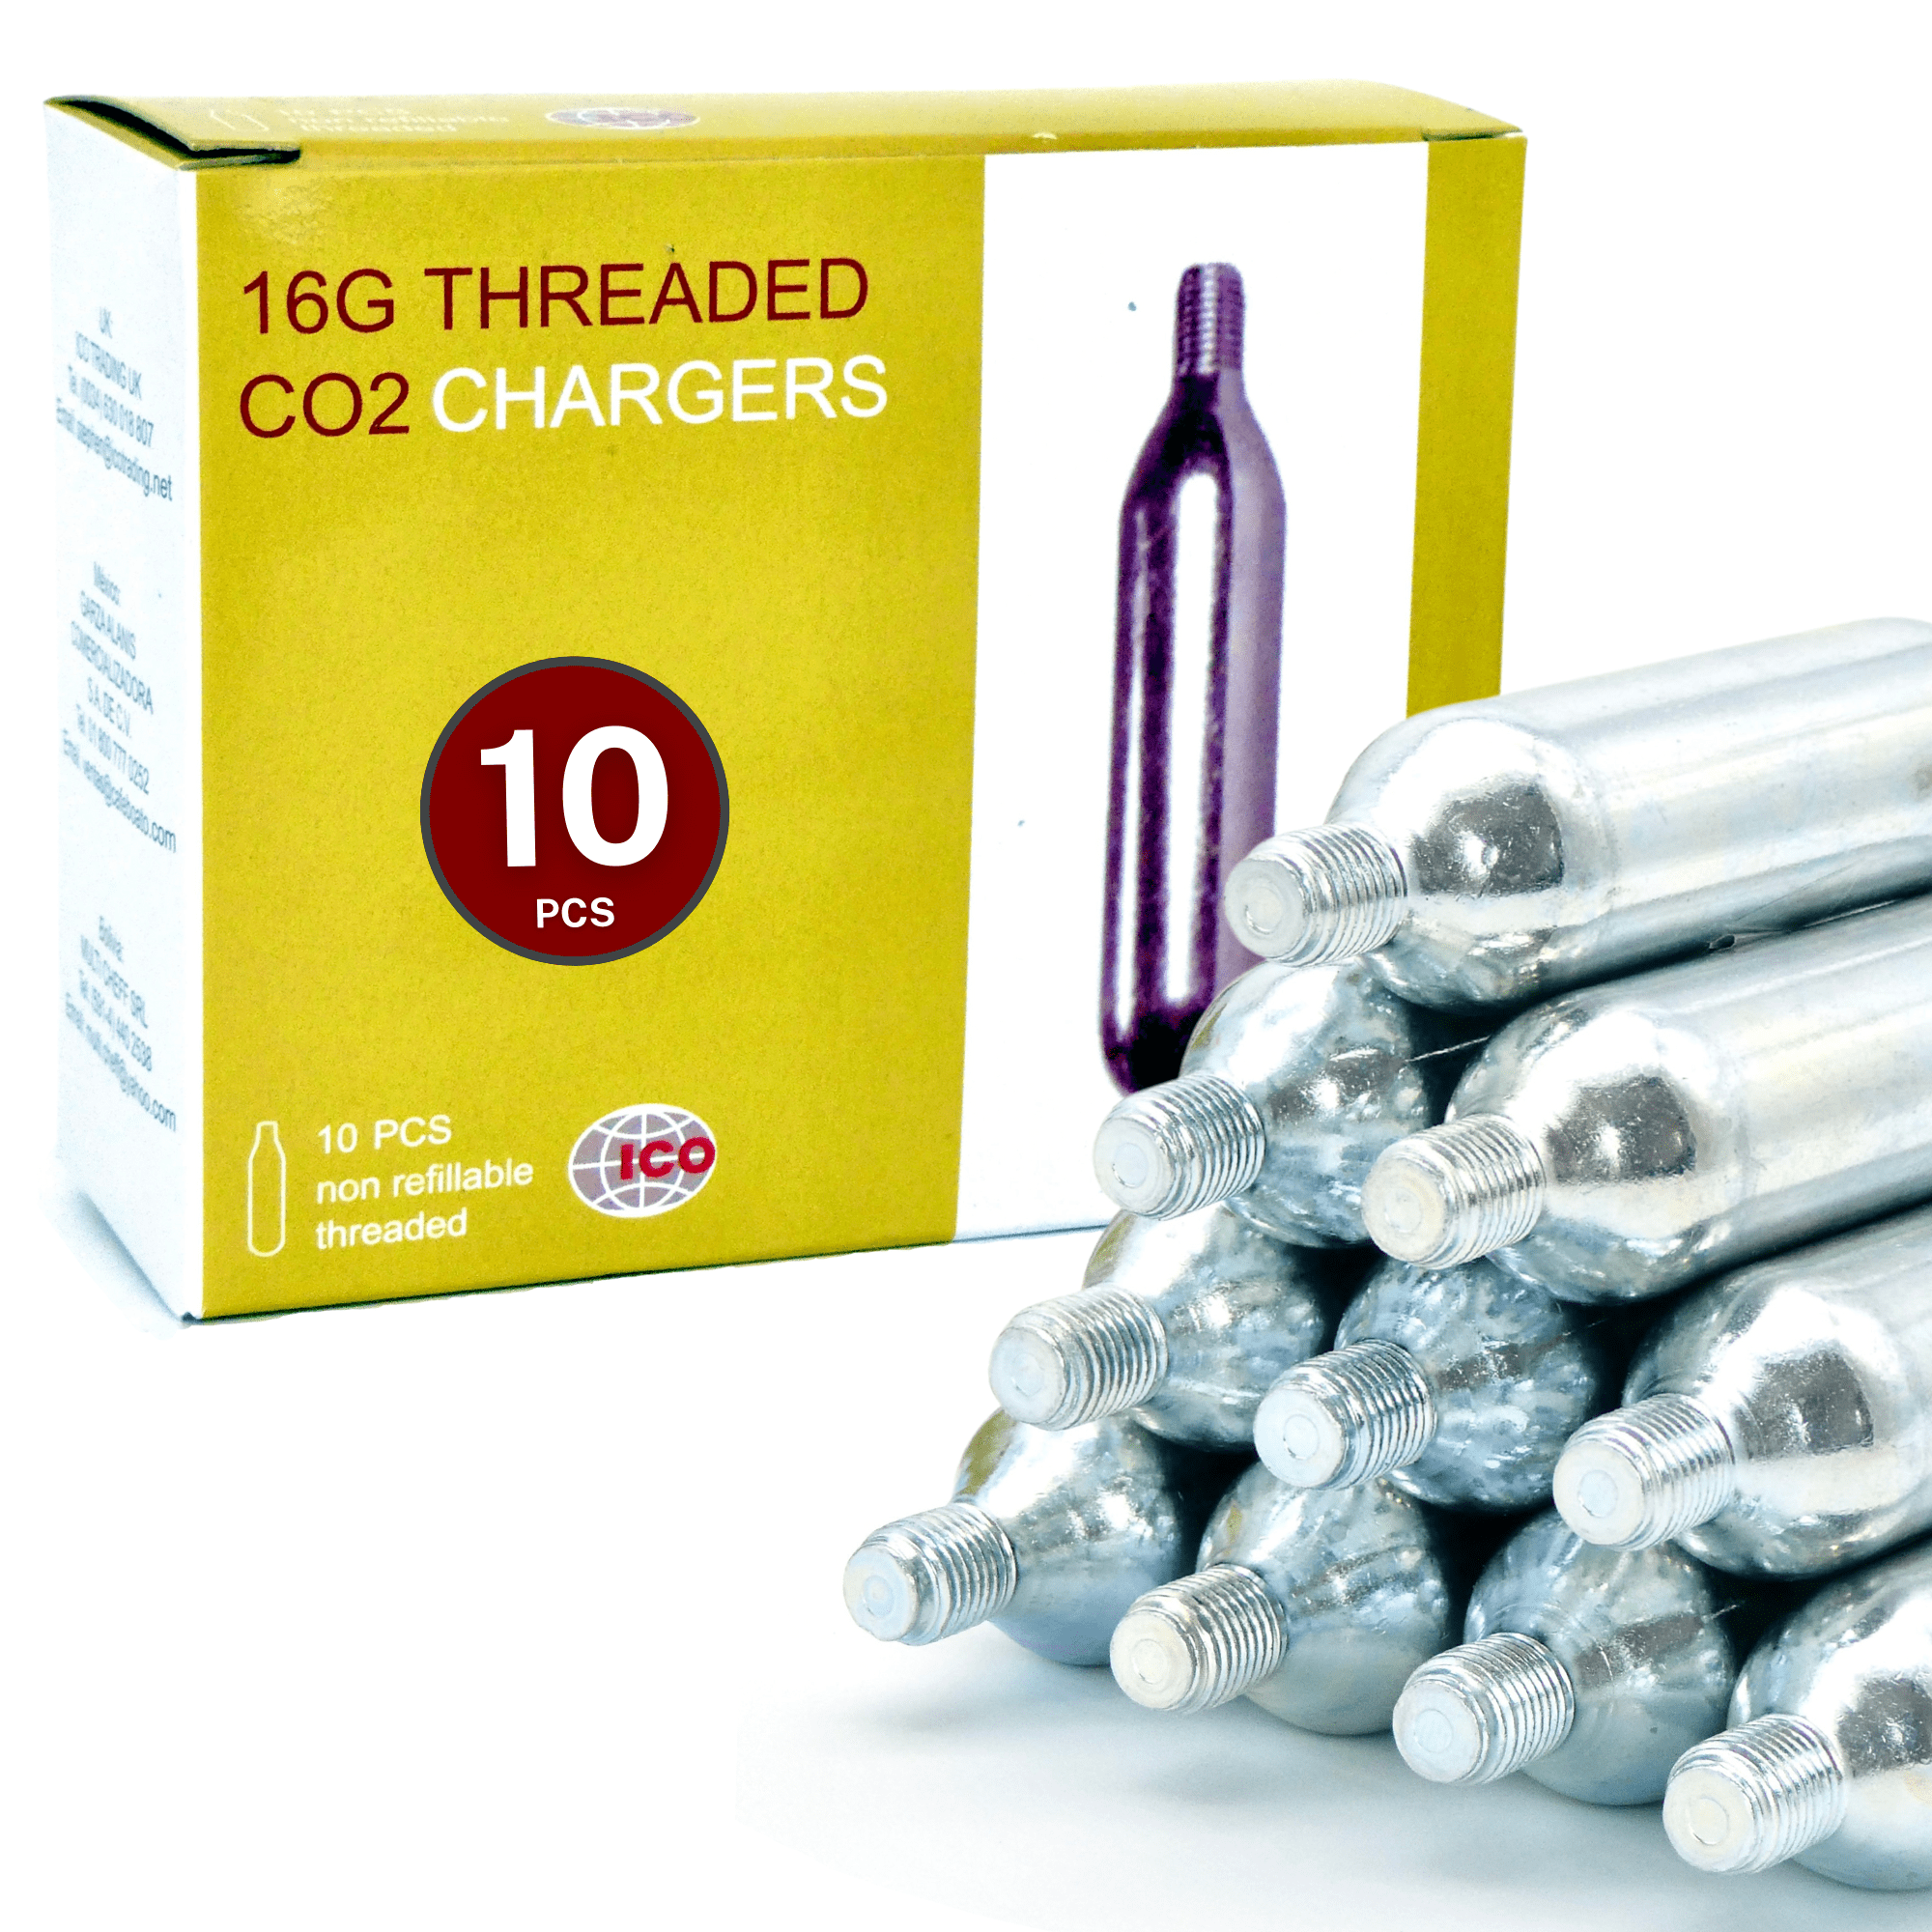 30 x Cartridge Soda Chargers 8g CO2 Bulb Brew Beer Home Natural Gas Non-Threaded 